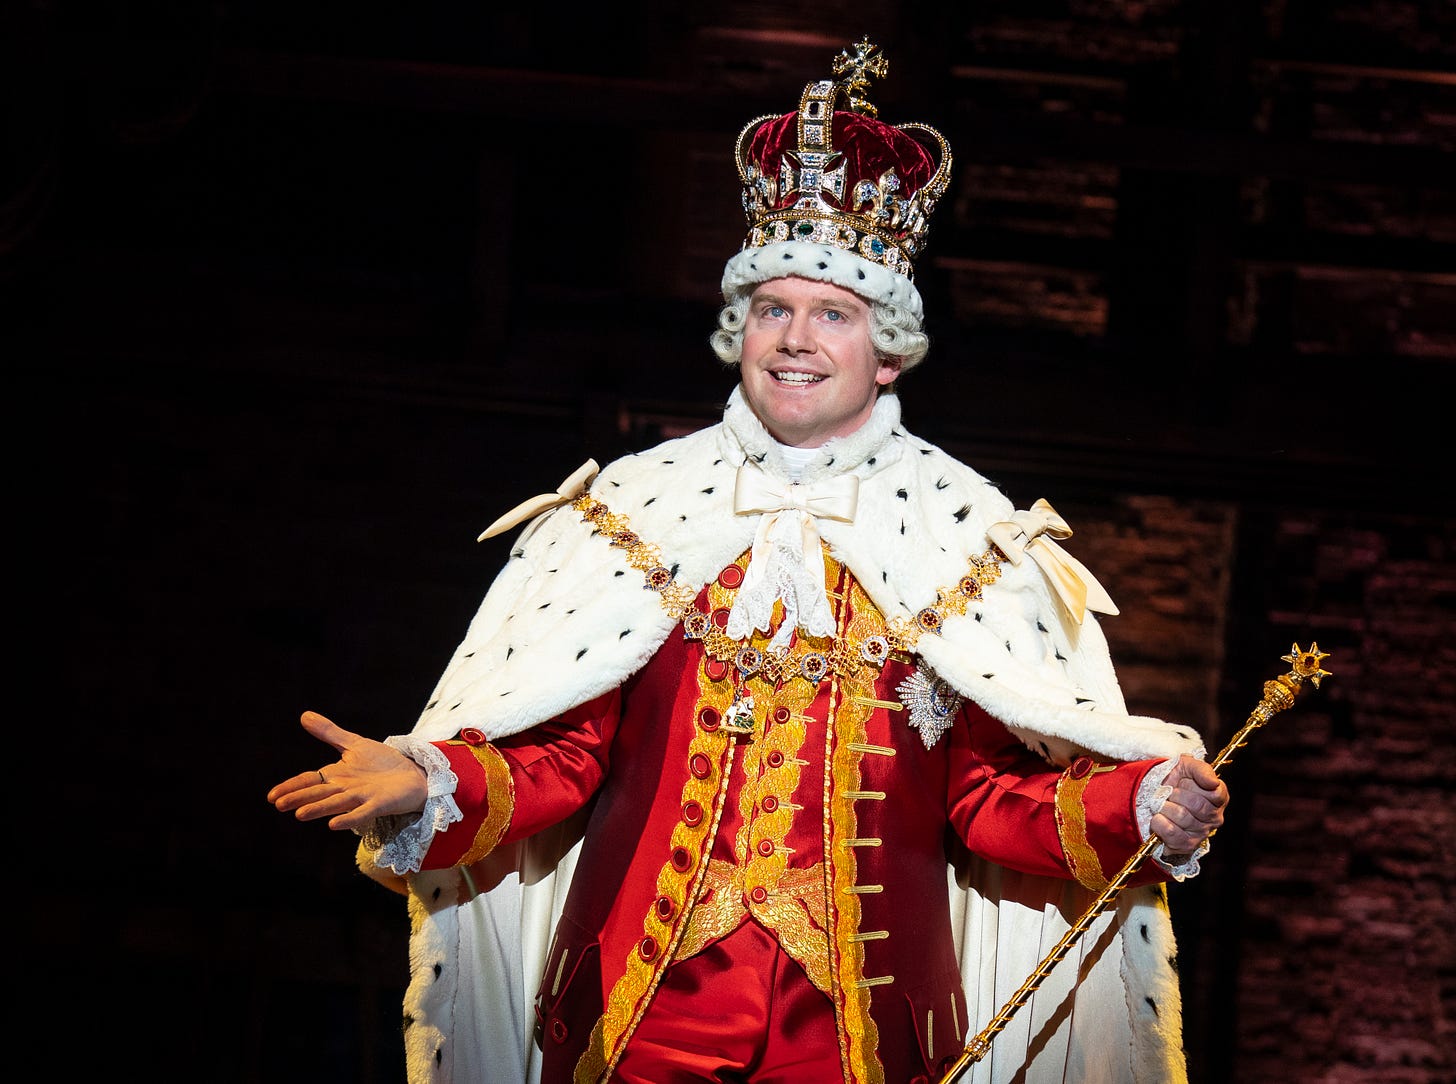 King George III, as played by Rory O'Malley in “Hamilton” the Musical on Broadway. (Photo by Joan Marcus)